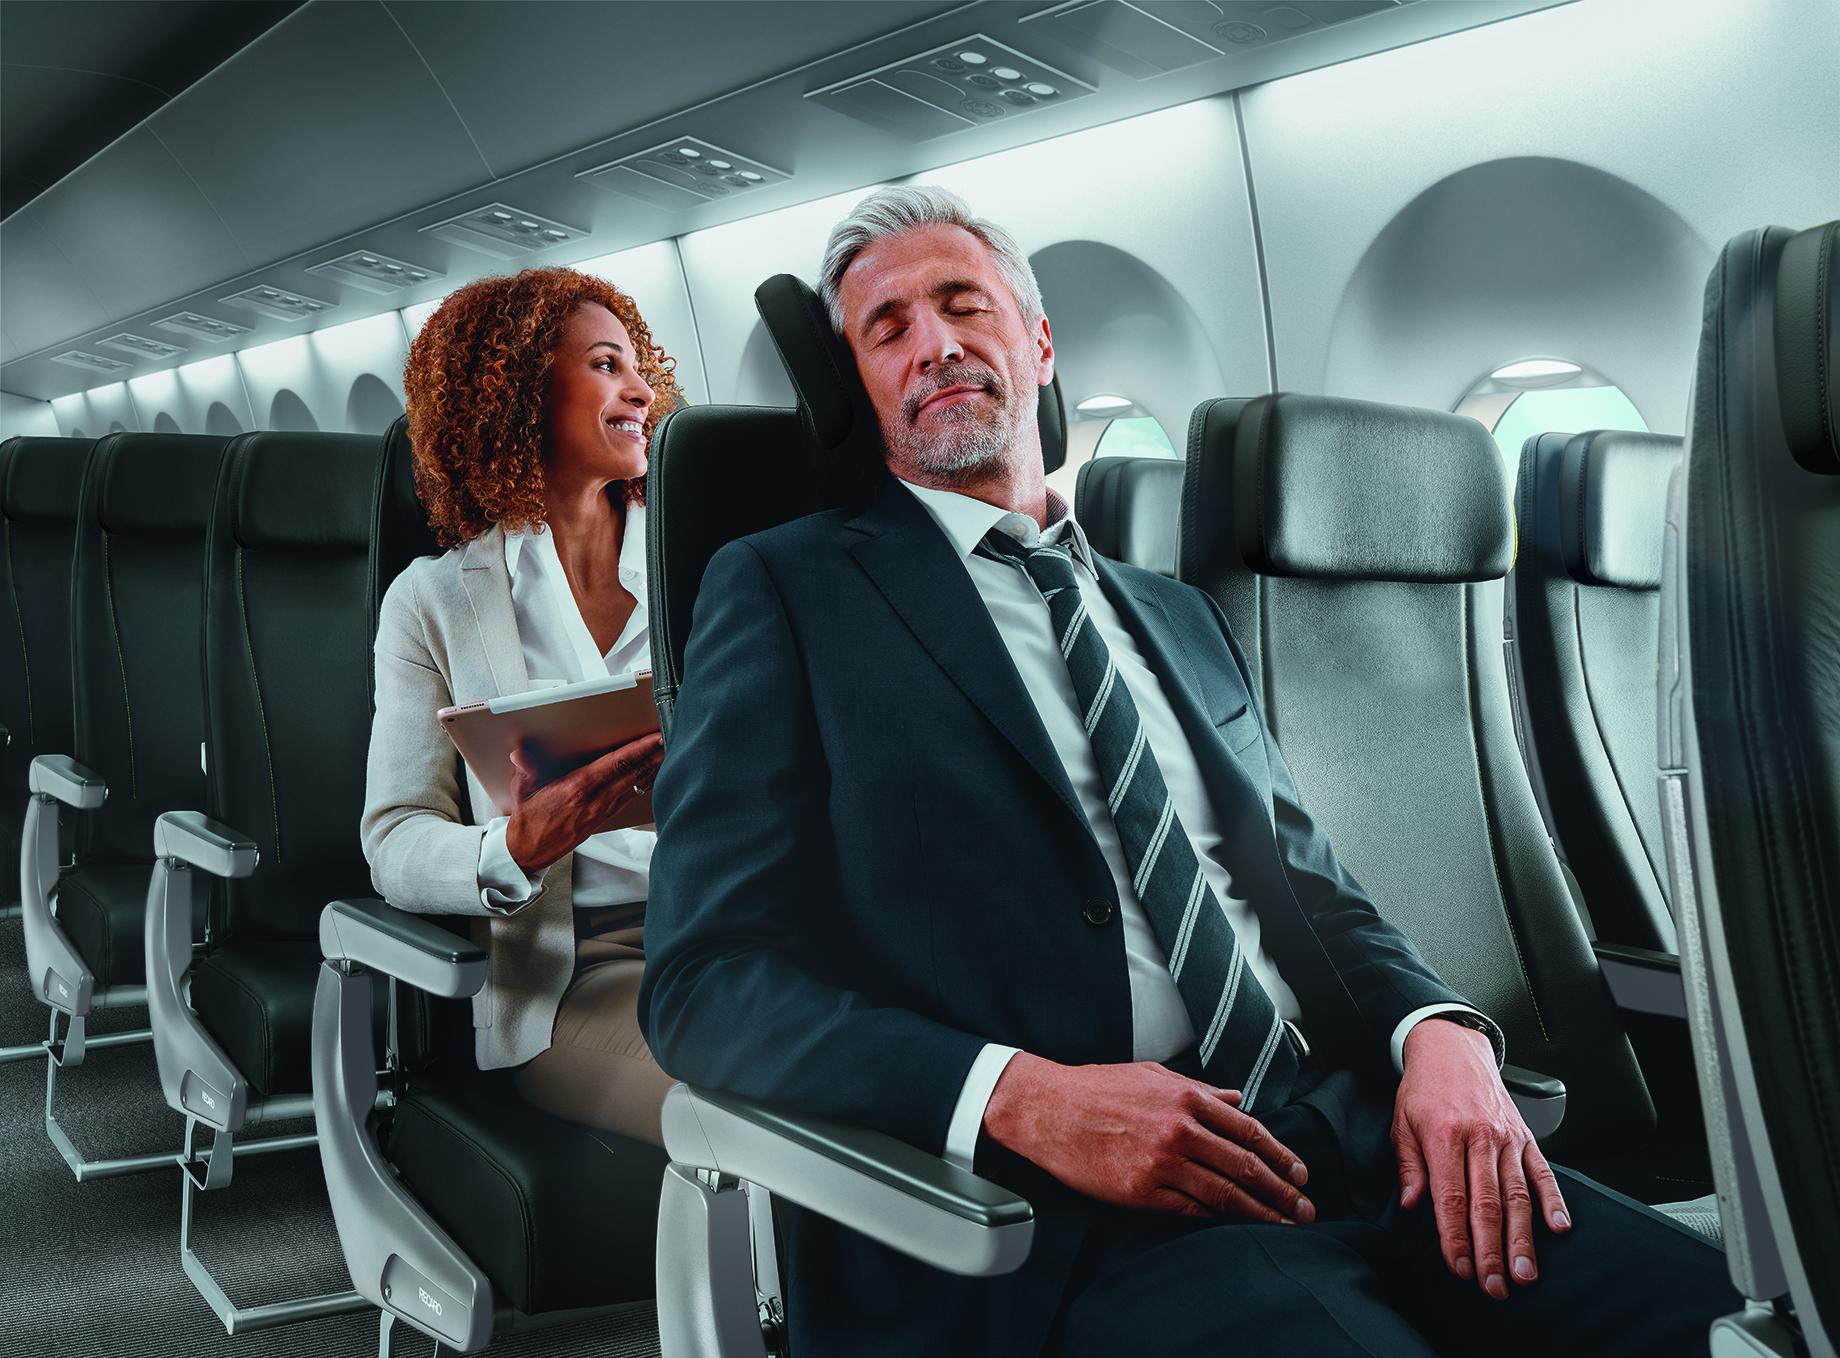 Gallery: New seats offer refreshed designs | Aviation Week Network